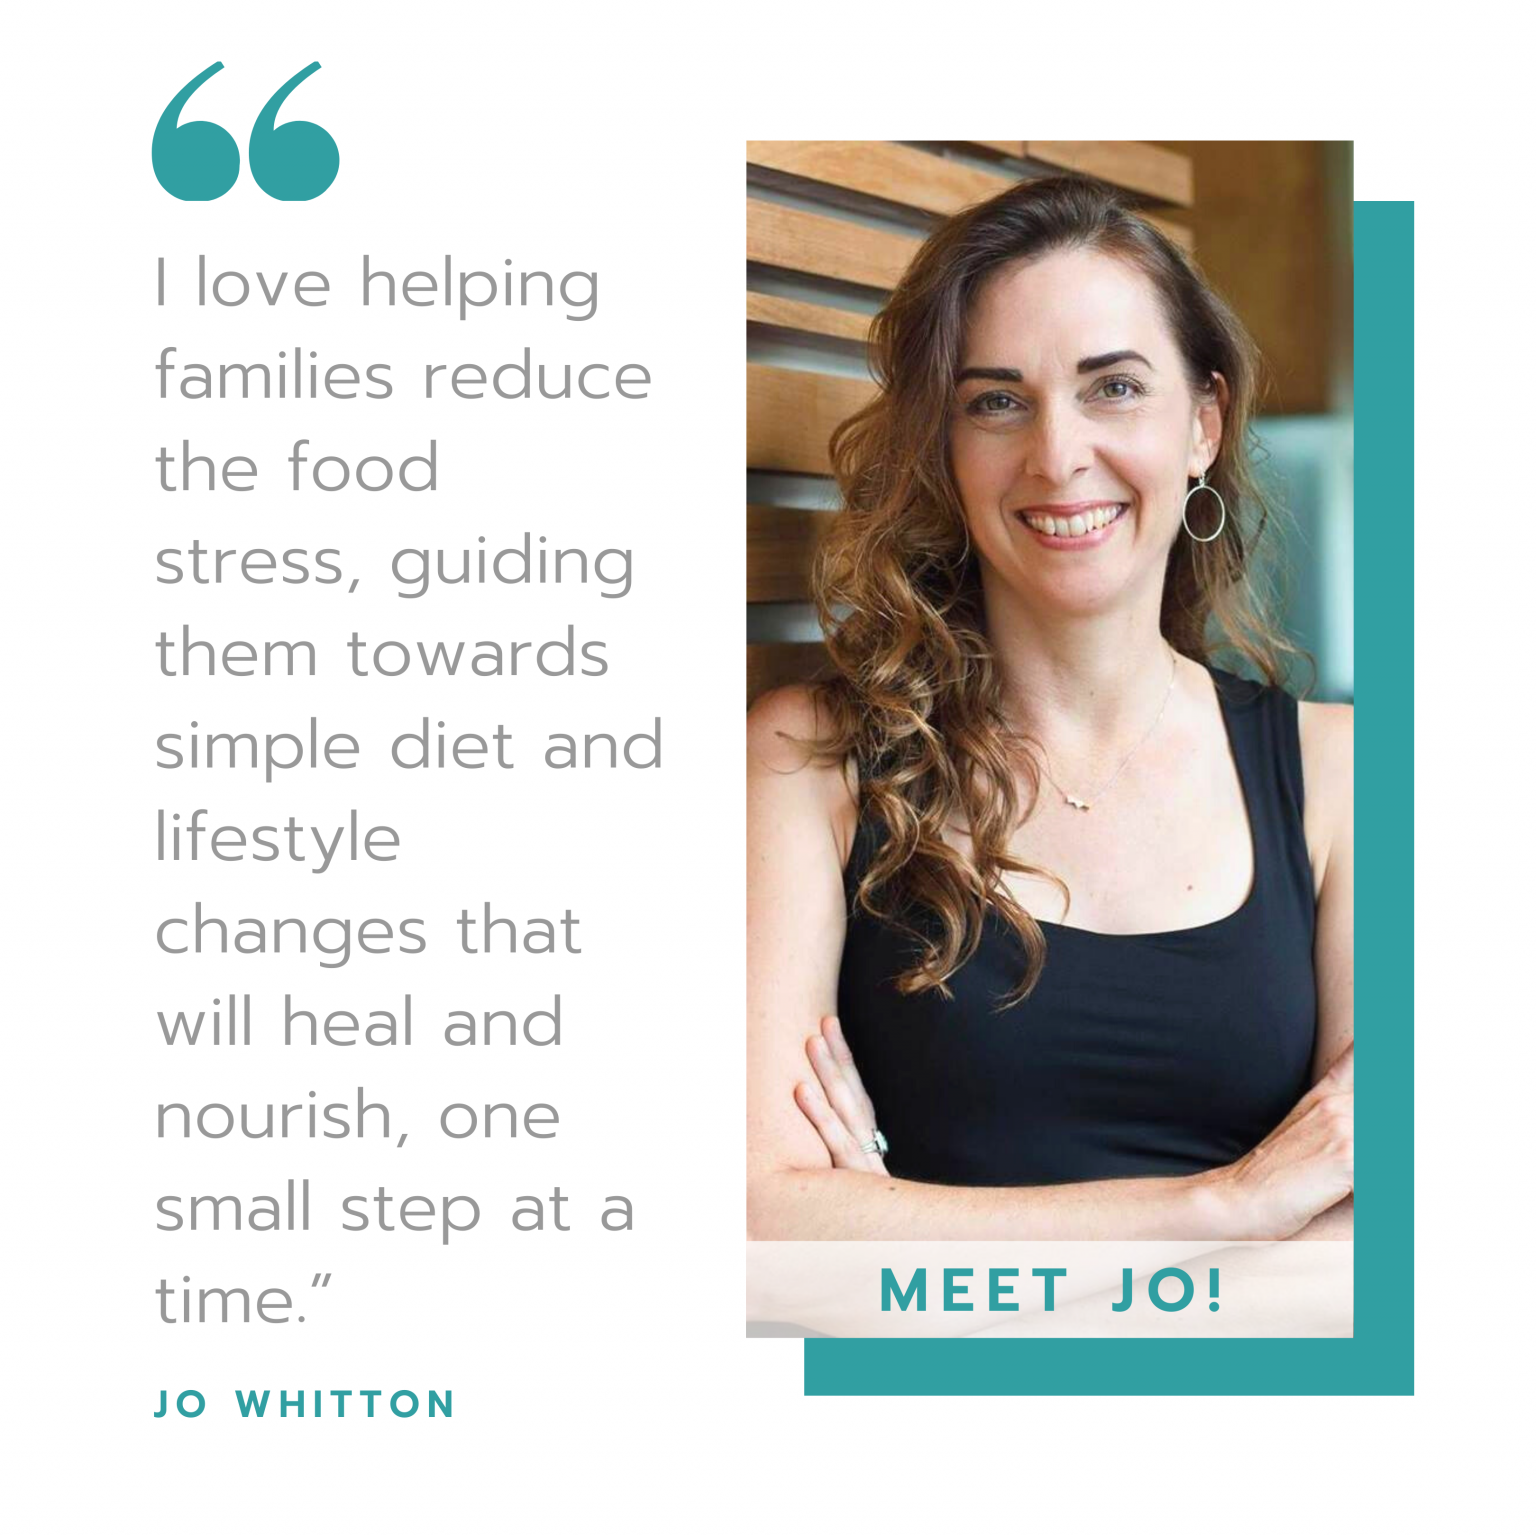 About Jo Whitton, Quirky Cooking